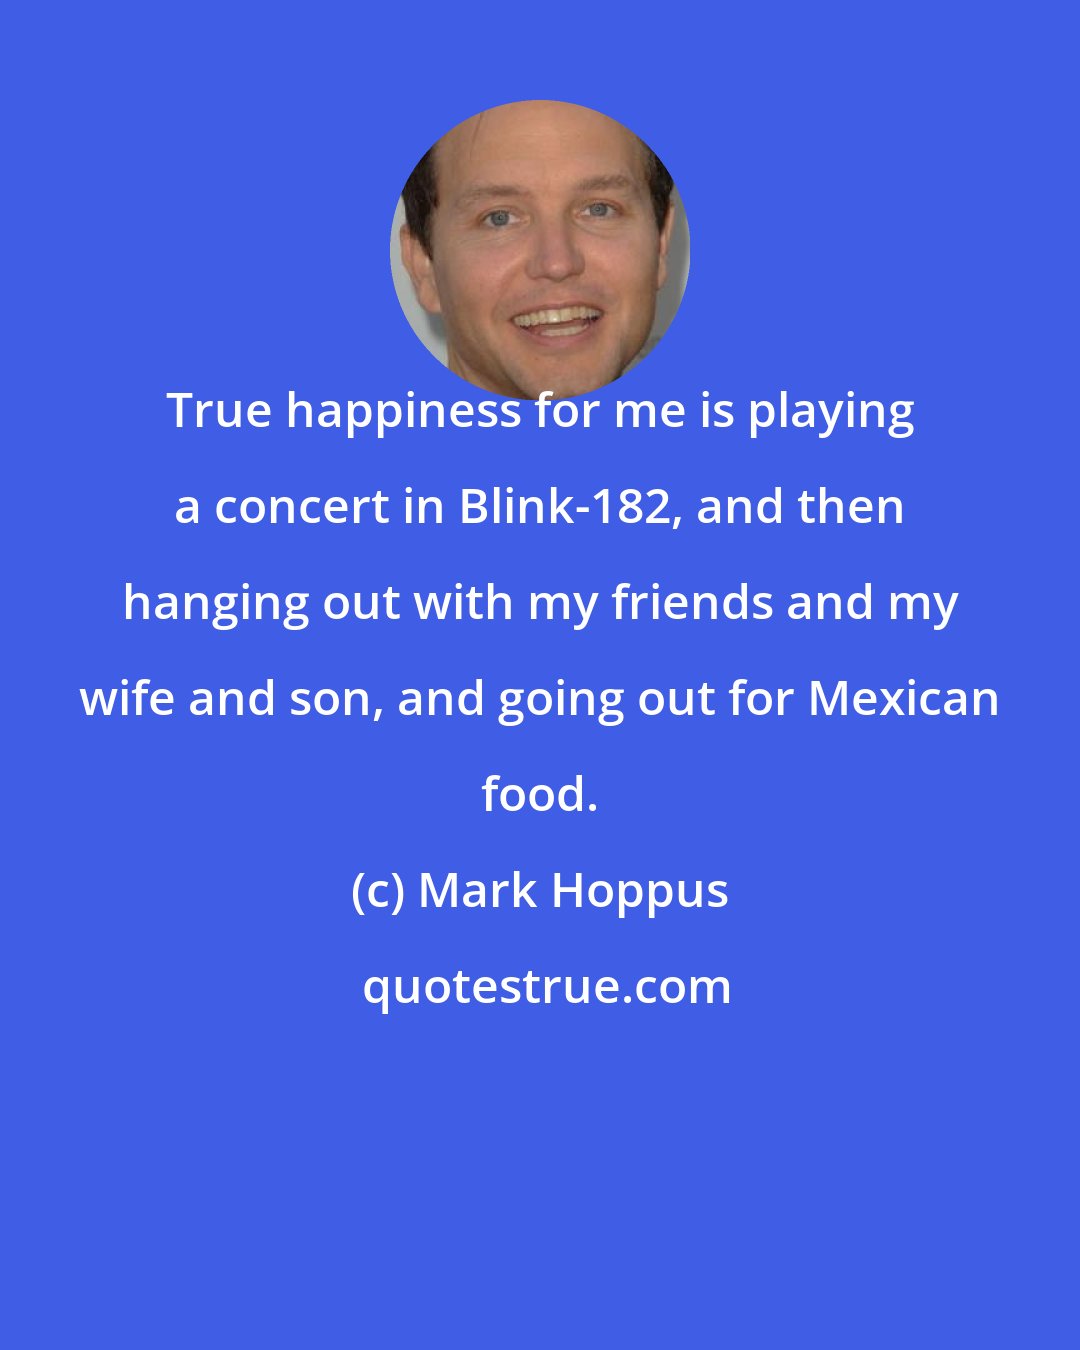 Mark Hoppus: True happiness for me is playing a concert in Blink-182, and then hanging out with my friends and my wife and son, and going out for Mexican food.